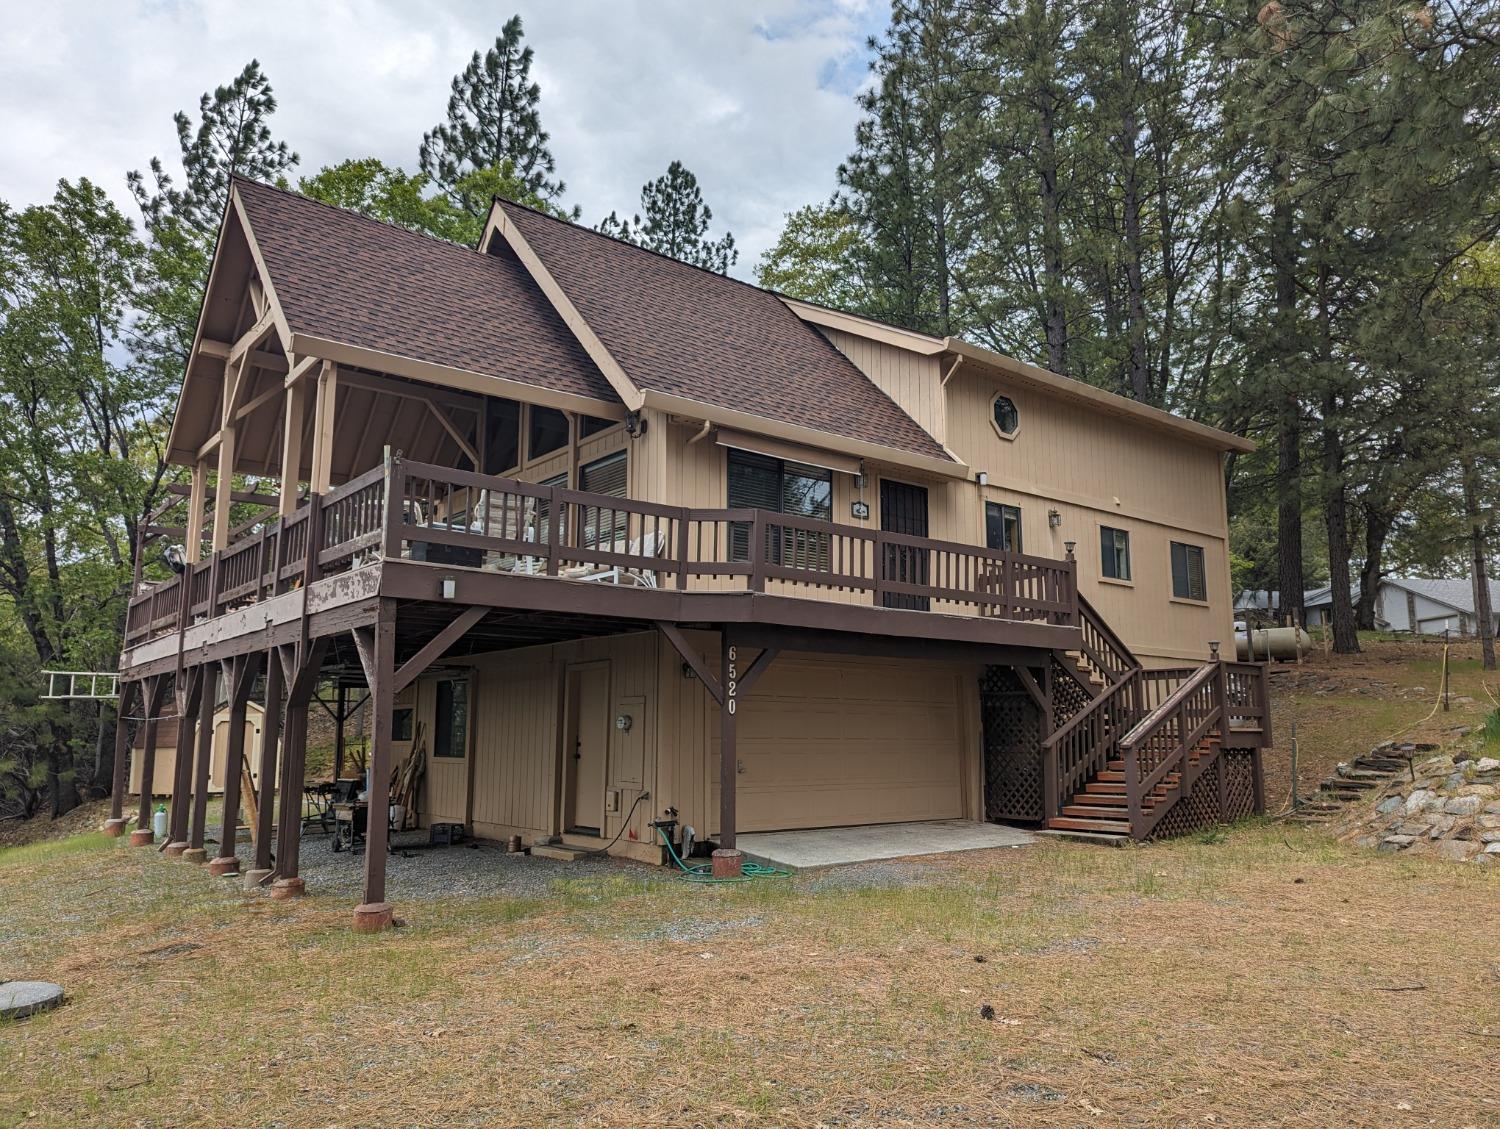 Photo of 6520 Longridge Ct in Foresthill, CA